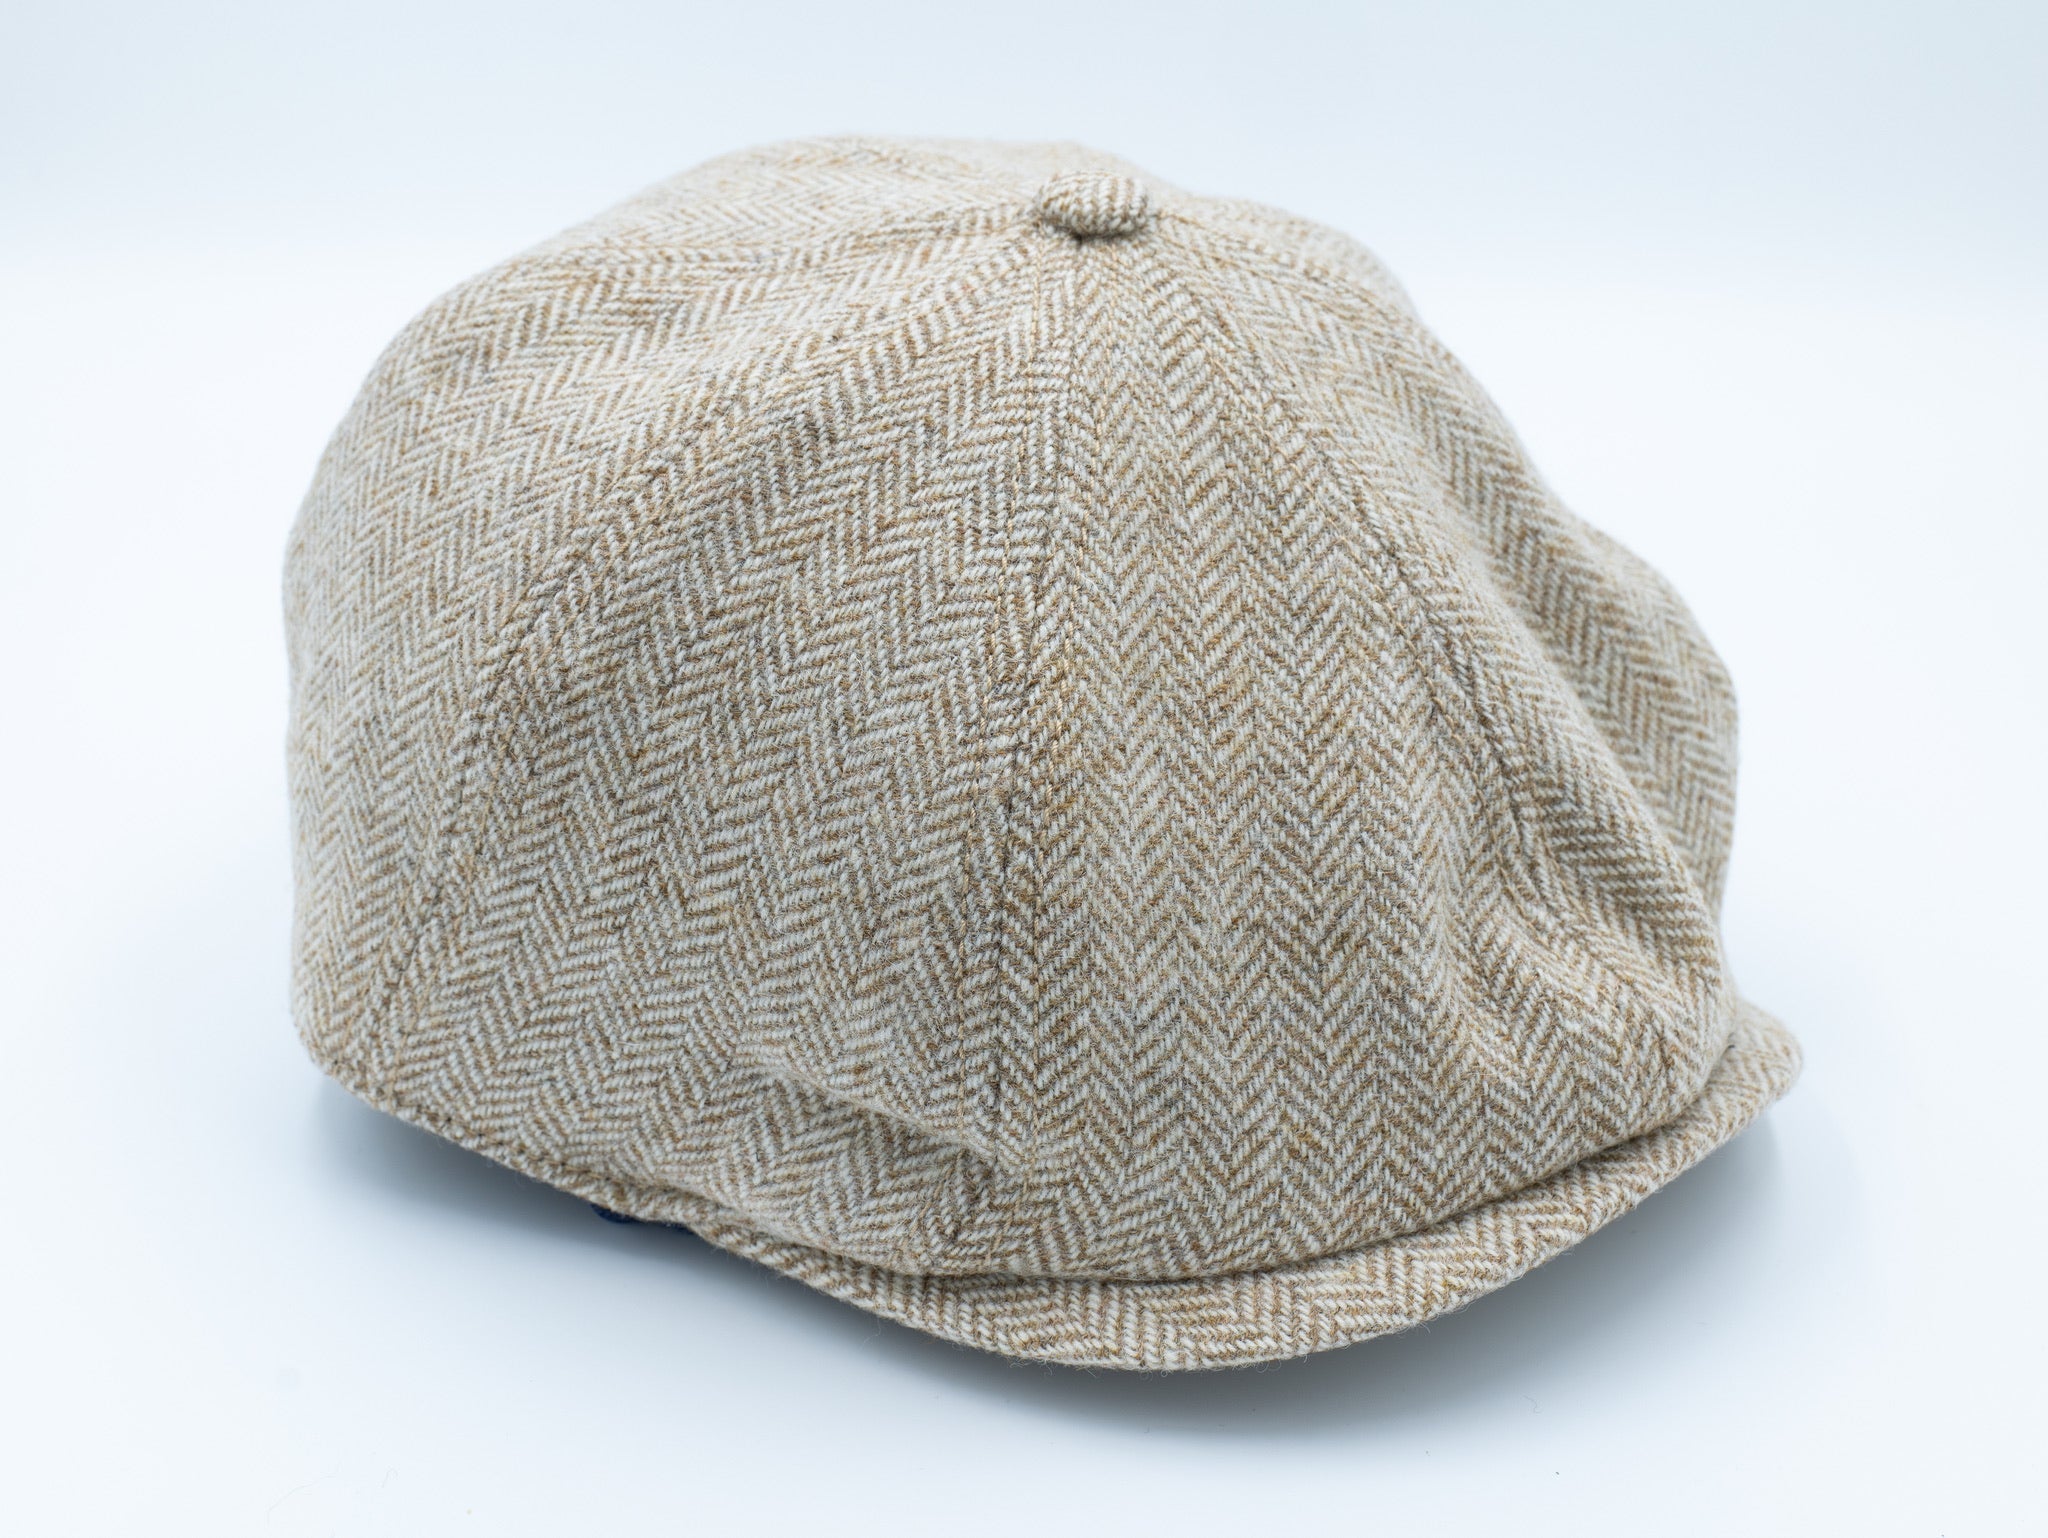 orangebearstl newsboy hat in oatmeal color front angle